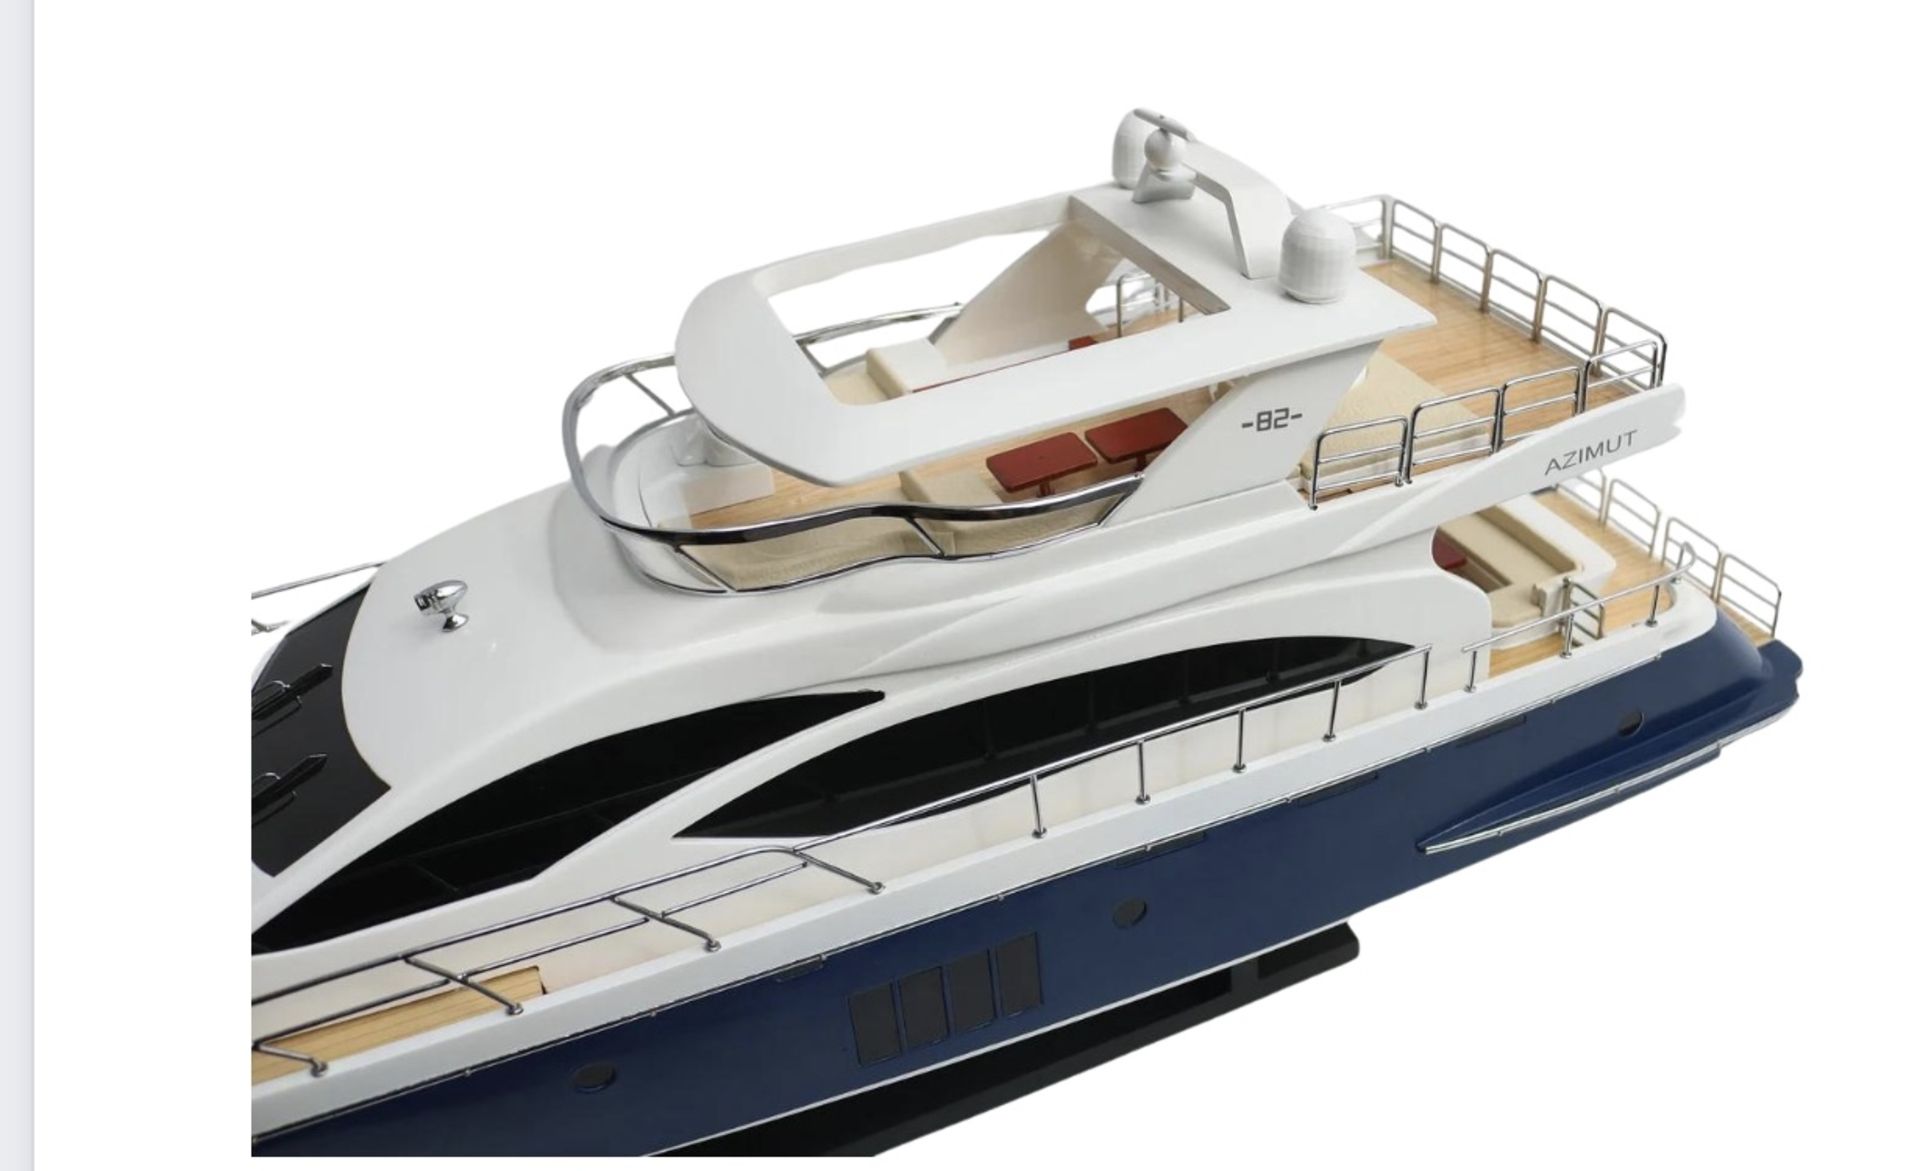 Azimut 82 Yacht Wooden Scale Desk Display Model - Image 9 of 10